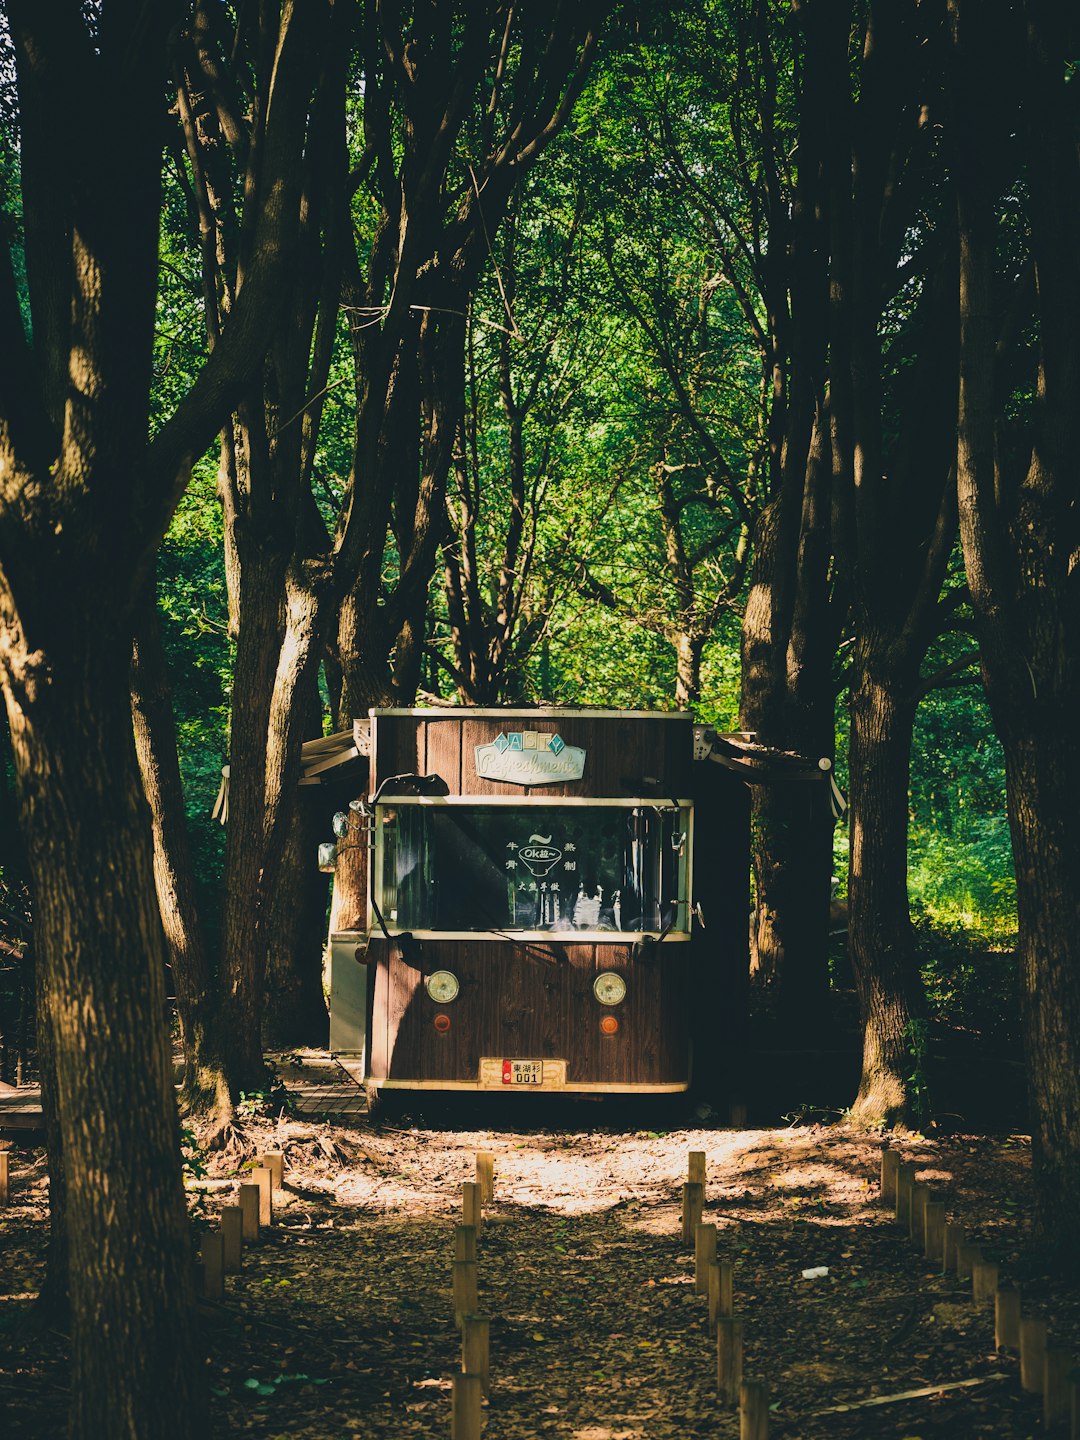 brown and black bus in forest during daytime